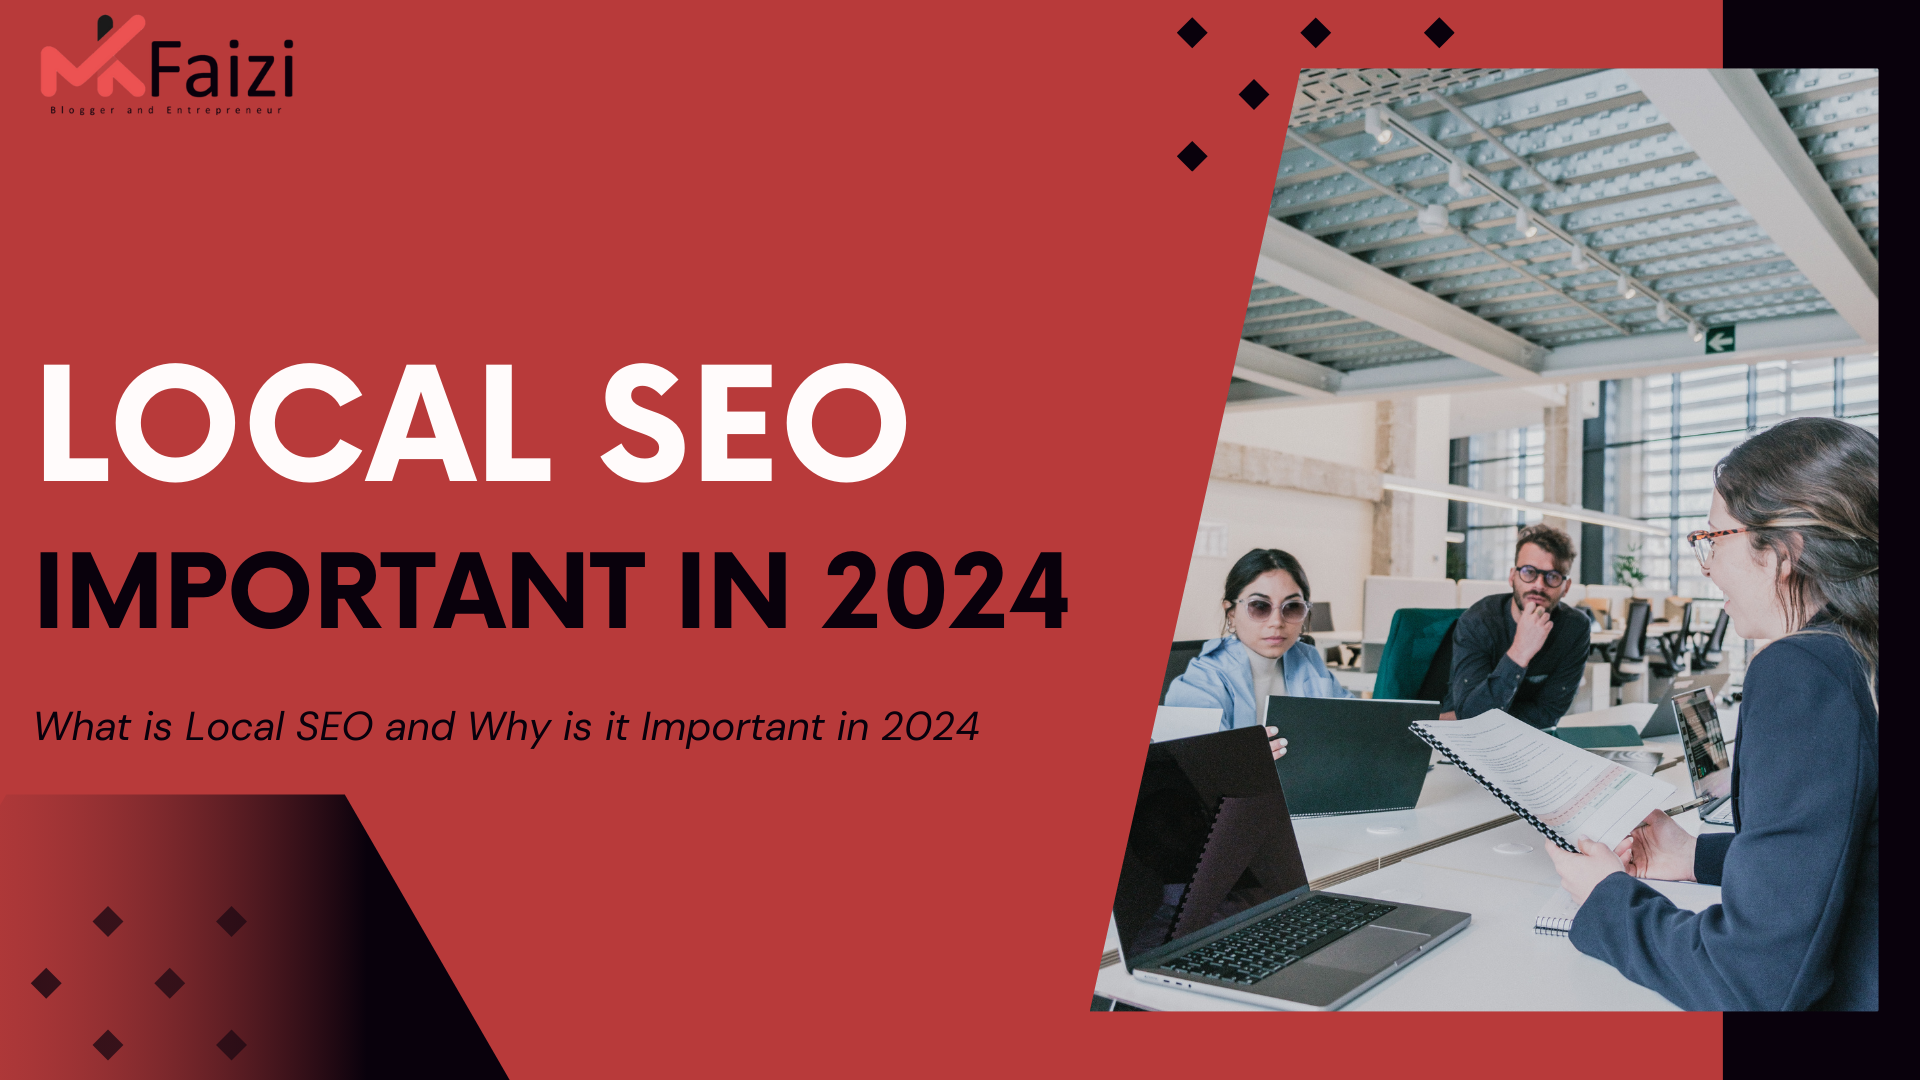 What is Local SEO and Why is it Important in 2024